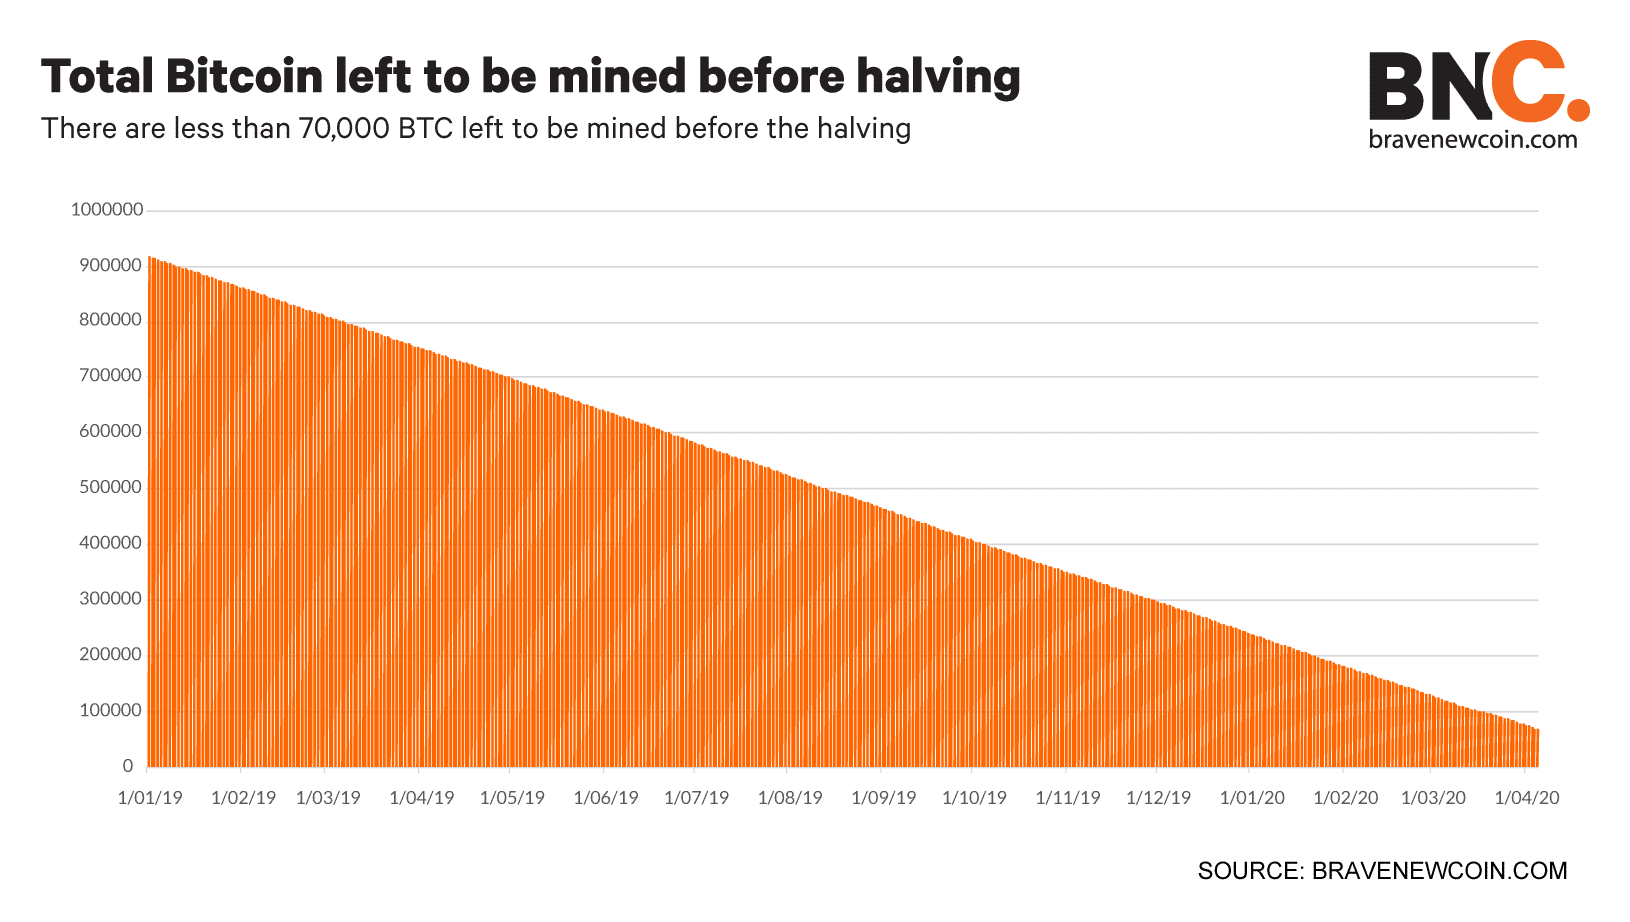 Total-Bitcoin-left-to-be-mined-before-halving (6)